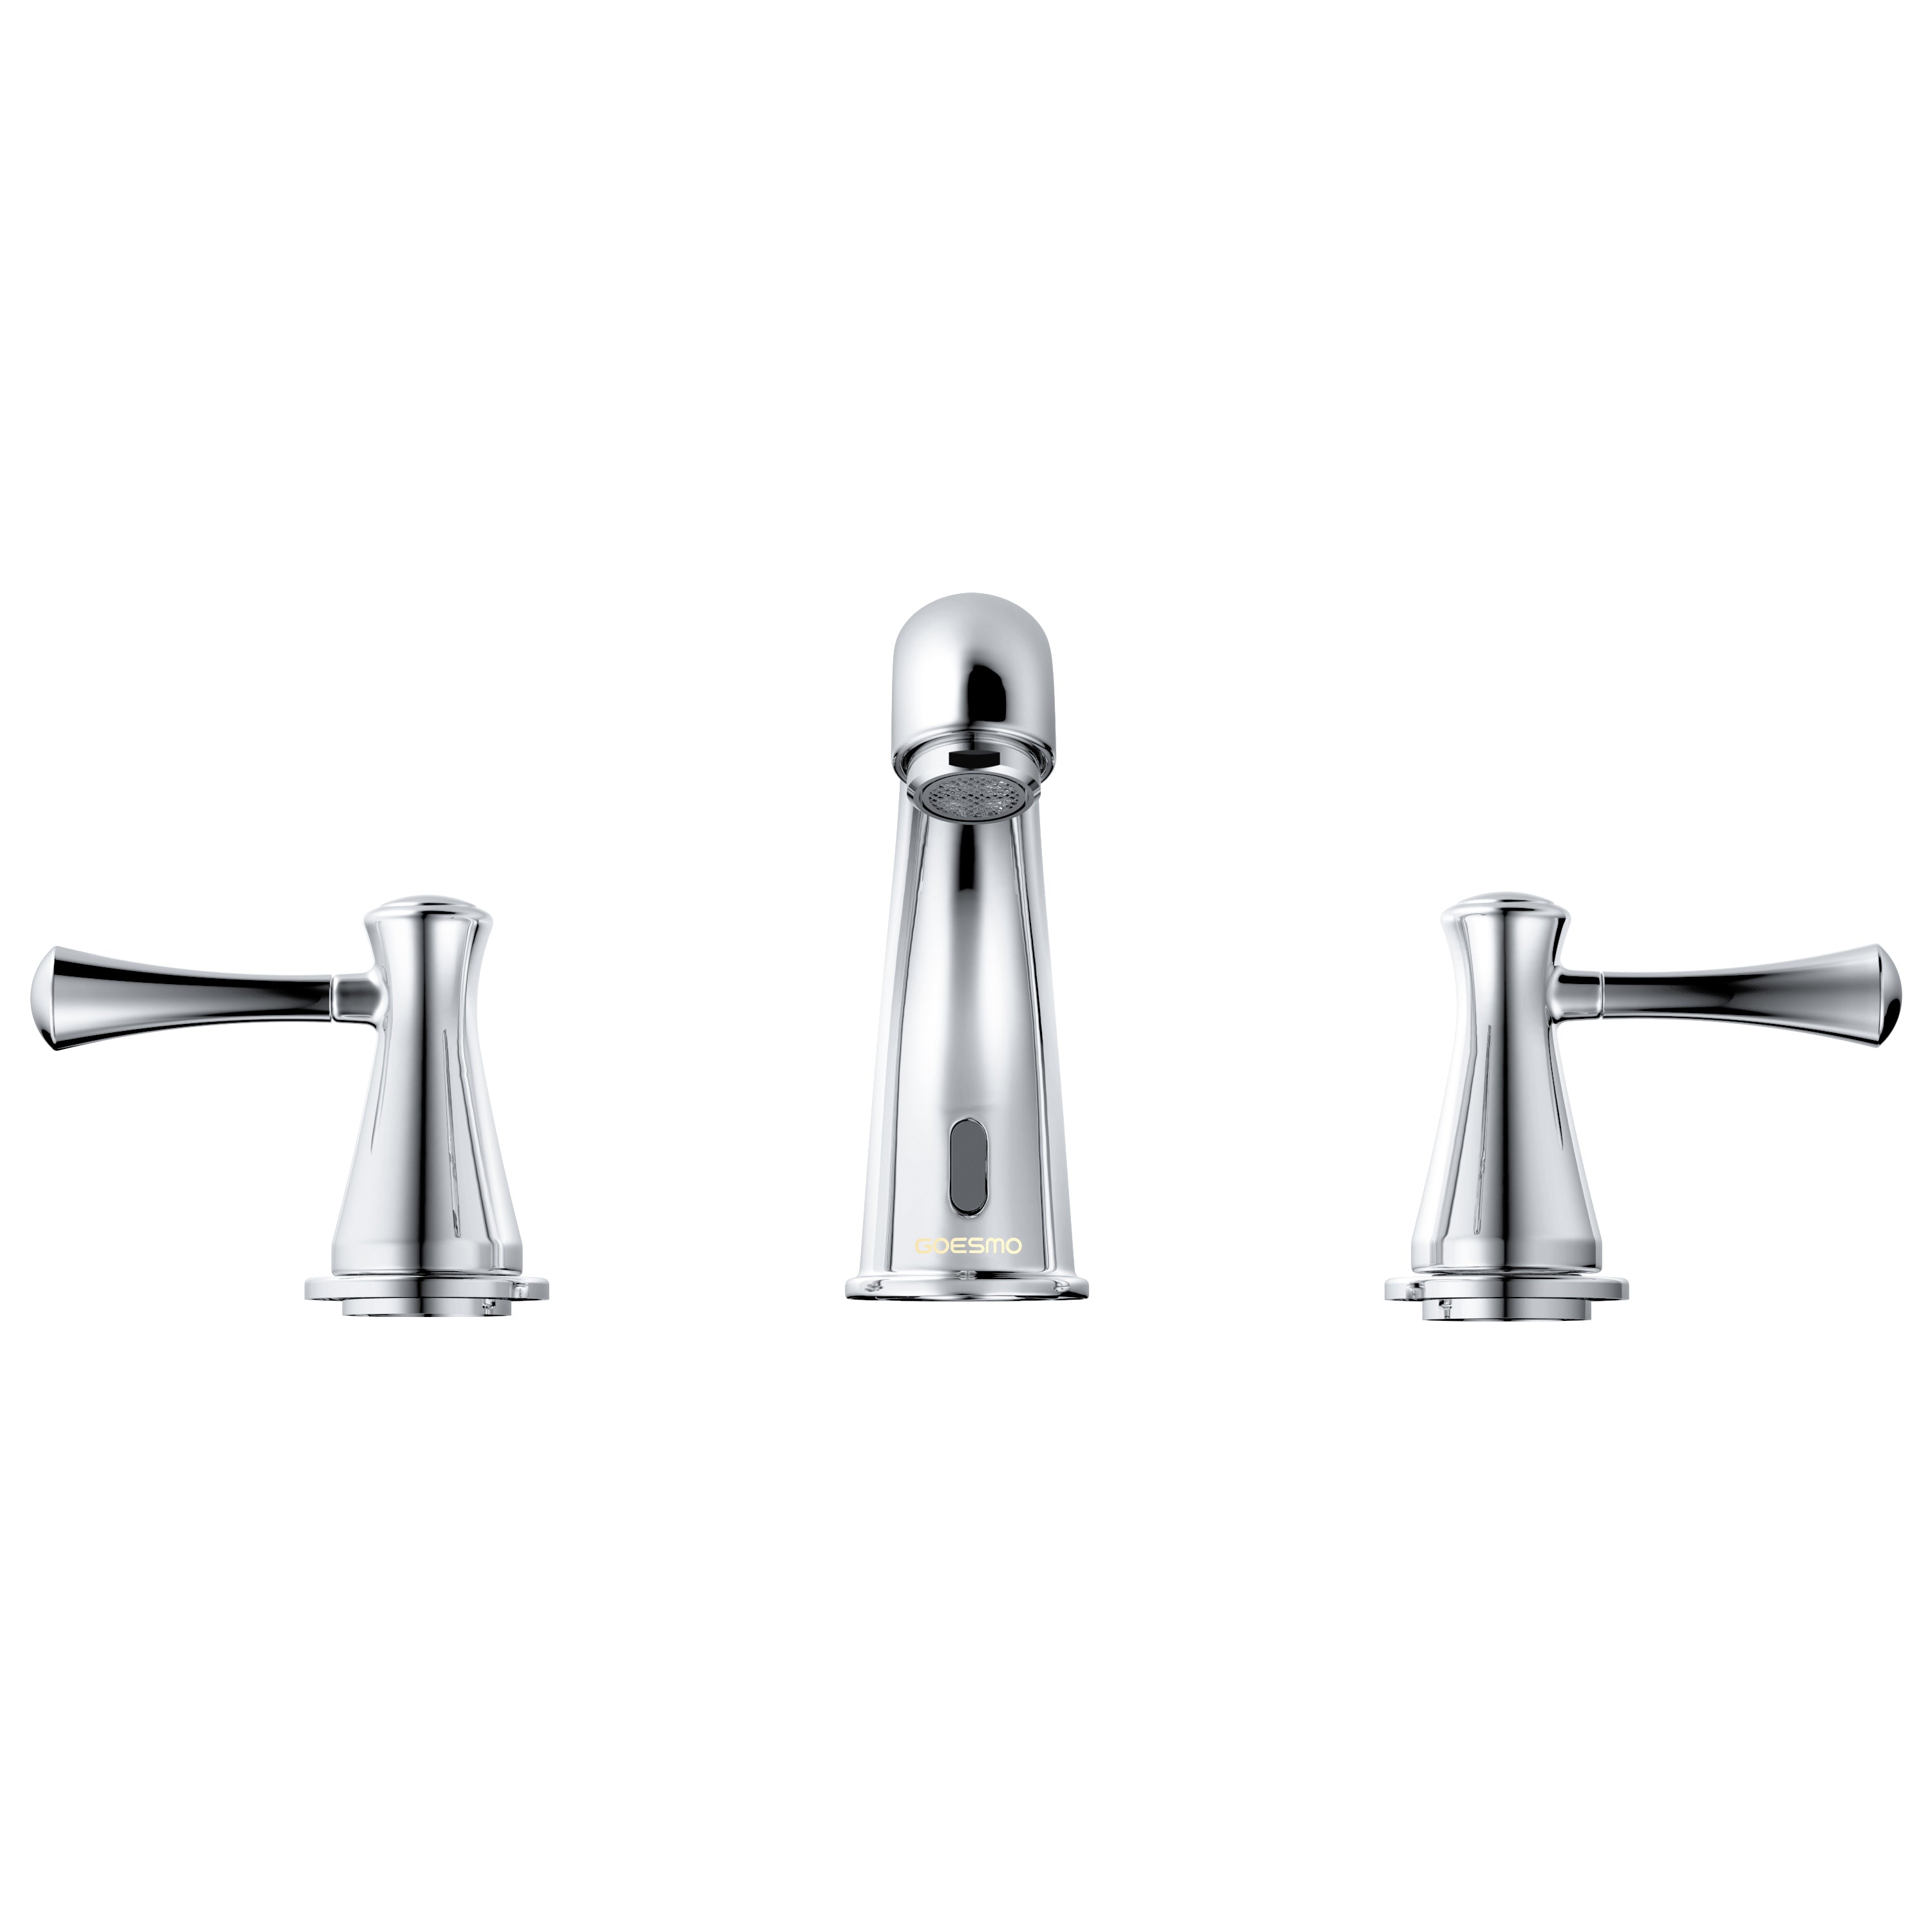 Goesmo Smart Touch-less Widespread Bathroom Sink Faucet